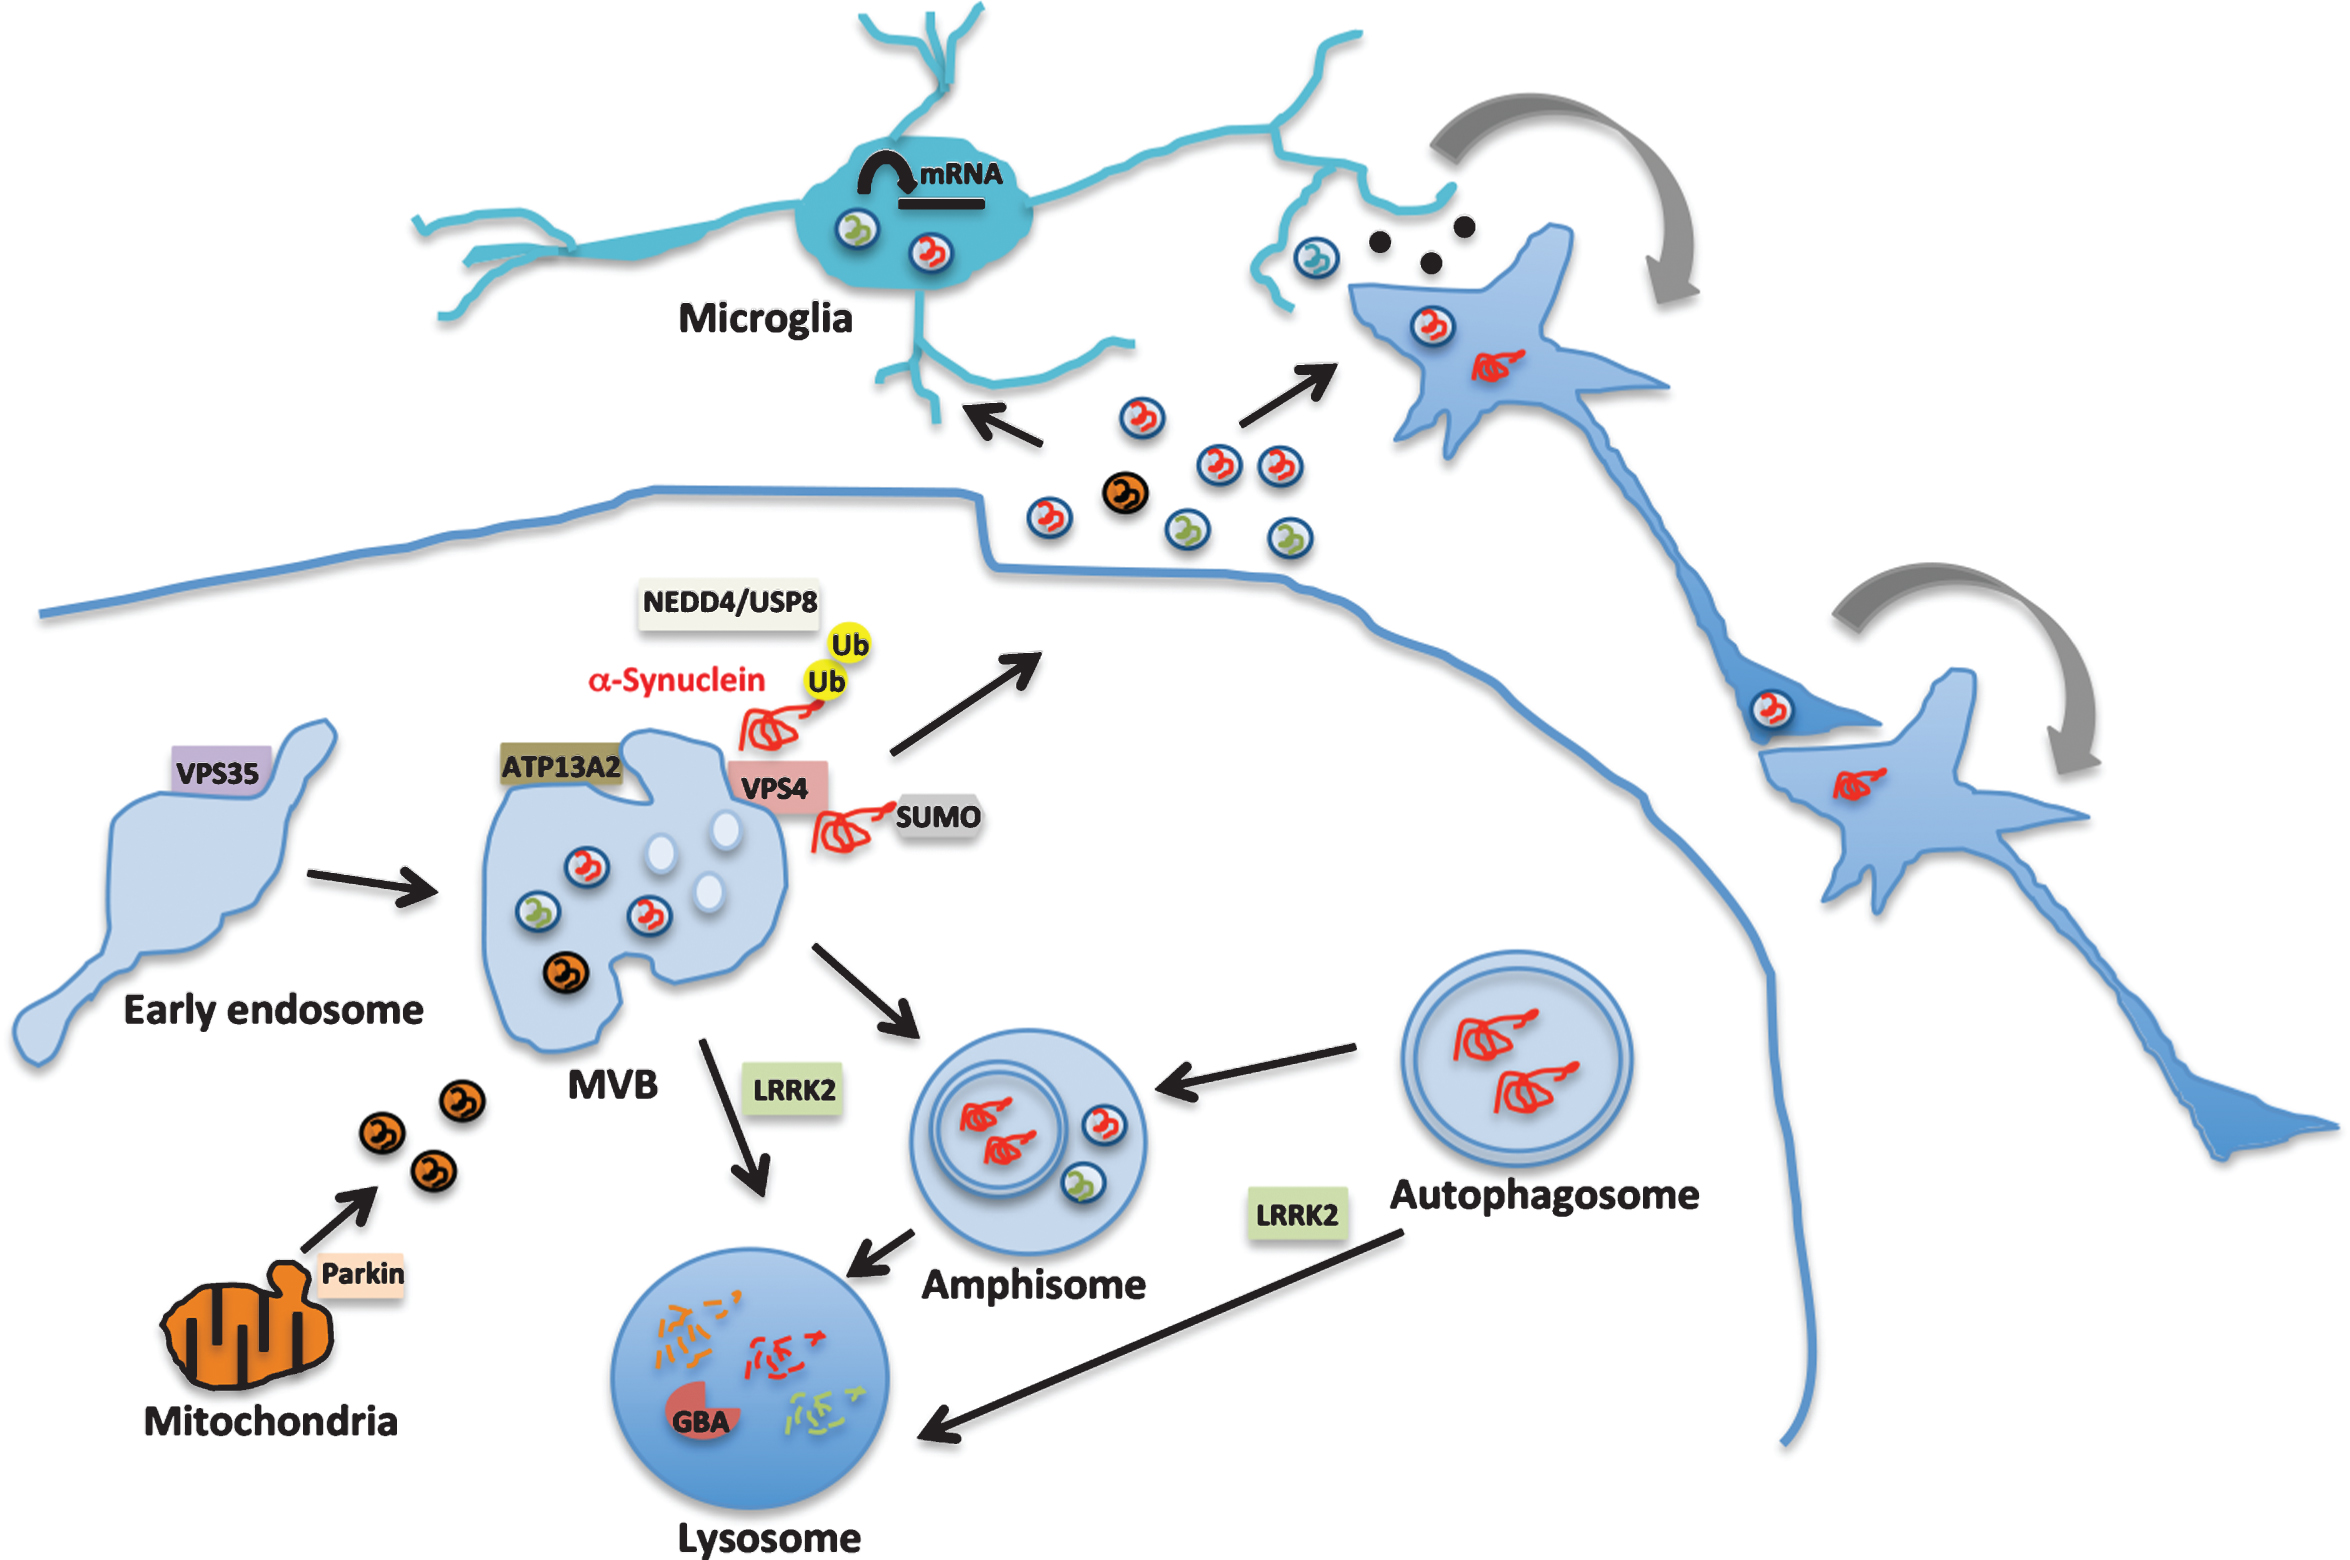 Exosome signaling in Parkinson’s disease pathobiology. Exosomes are generated within the multivesicular bodies (MVB) of the endosomal-lysosomal pathway. Genes that are implicated in familial forms of PD such as VPS35, LRRK2, ATP13A2 and Parkin, function in this pathway as shown in the diagram. Heterozygous mutations in GBA that increase the risk of PD by 6-fold impair lysosomal function. LRRK2 regulates this pathway at multiple steps through its kinase activity and is also an exosomal cargo protein (shown in green). α-Synuclein (red) misfolding is considered a key pathogenic event in sporadic PD. α-Synuclein is trafficked via the endosomal pathway by NEDD4/USP8 regulated ubiquitination (Ub) or sumoylation (SUMO) and released in exosomes. Exosomal α-synuclein, LRRK2 or other proteins may contribute to PD pathology by modulating microglial cell activation, facilitating the propagation of proteopathic α-synuclein assemblies or additional signaling events.